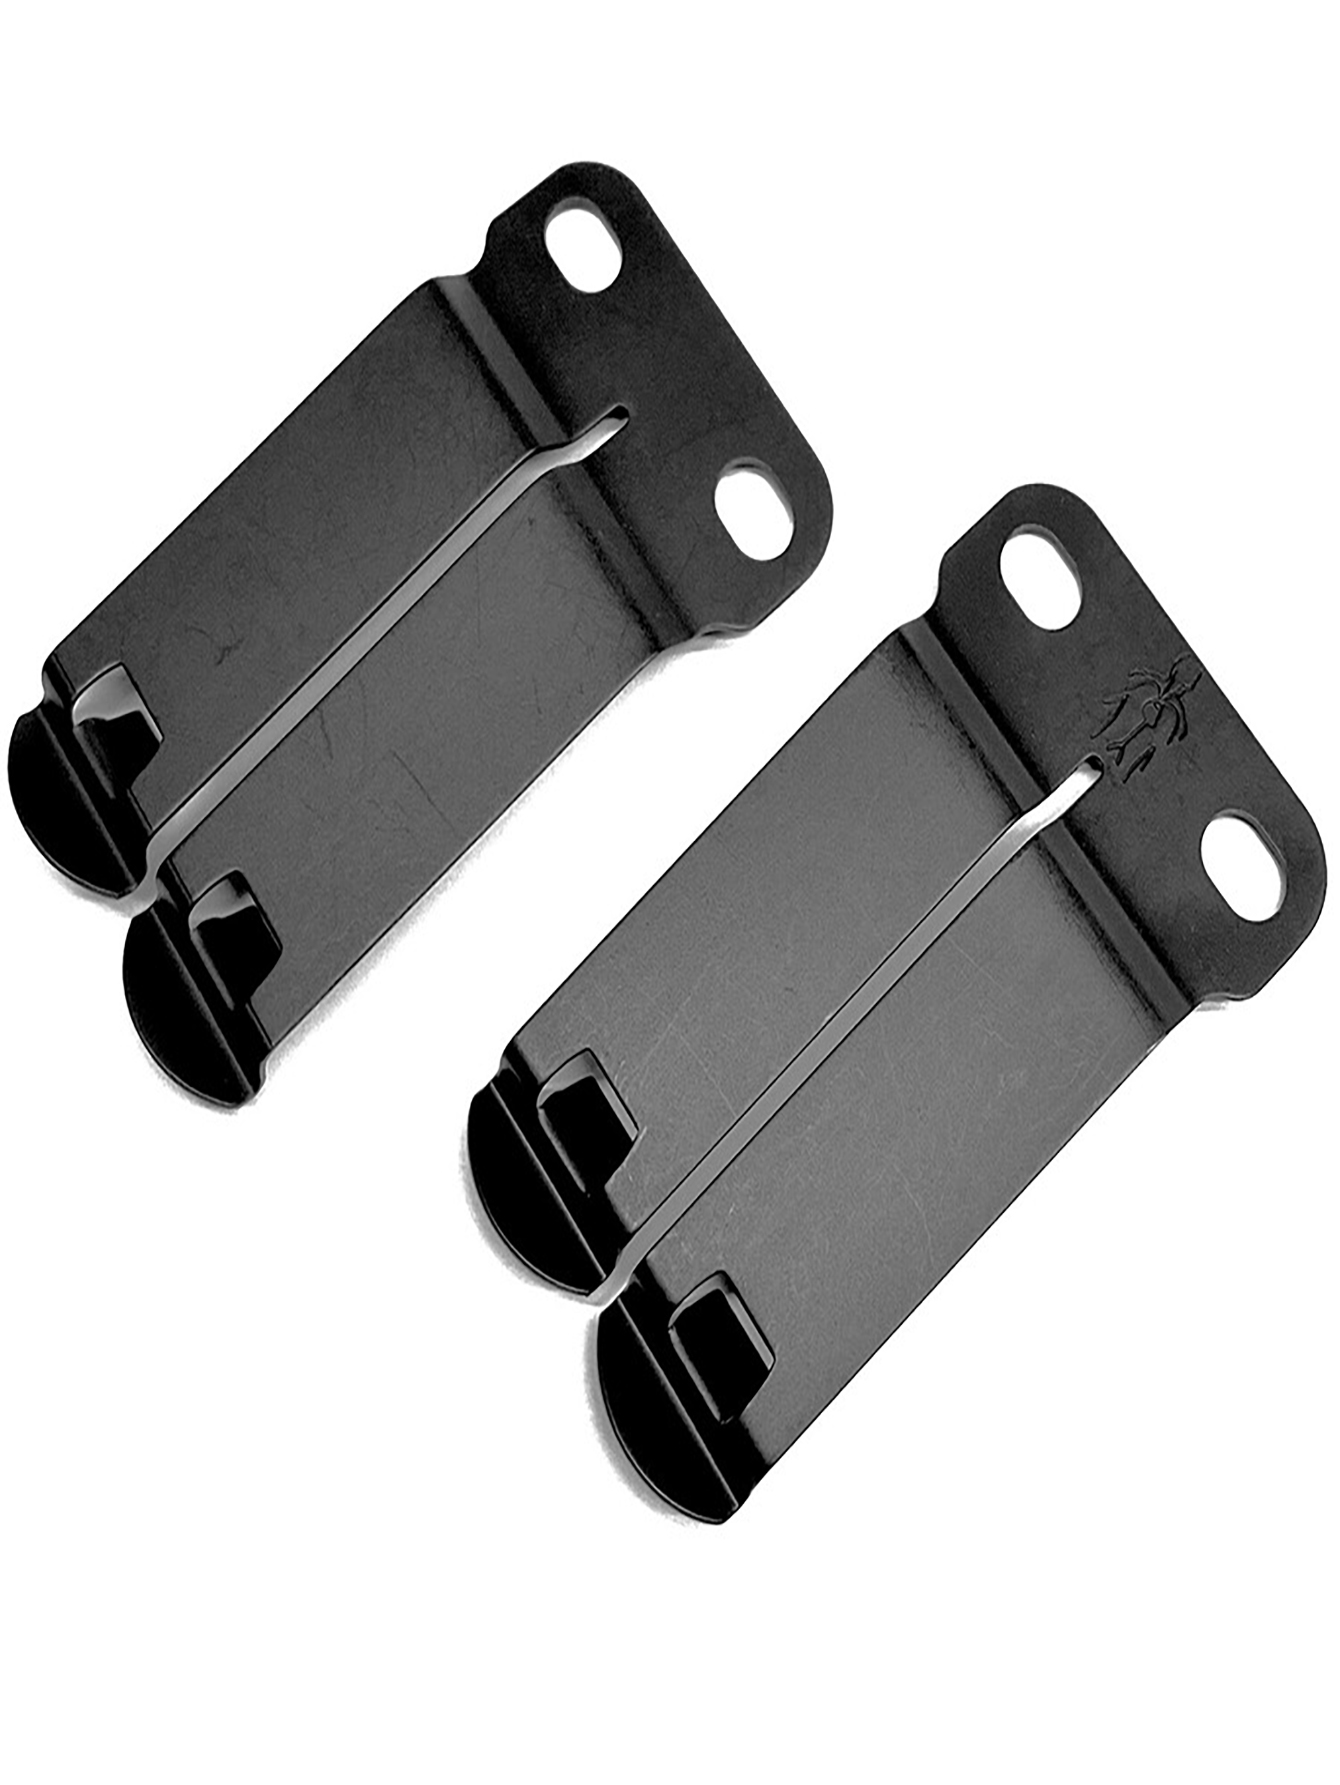 1pc Durable Kydex Holster Clips Stainless Steel K Sheath Waist Clip For ...